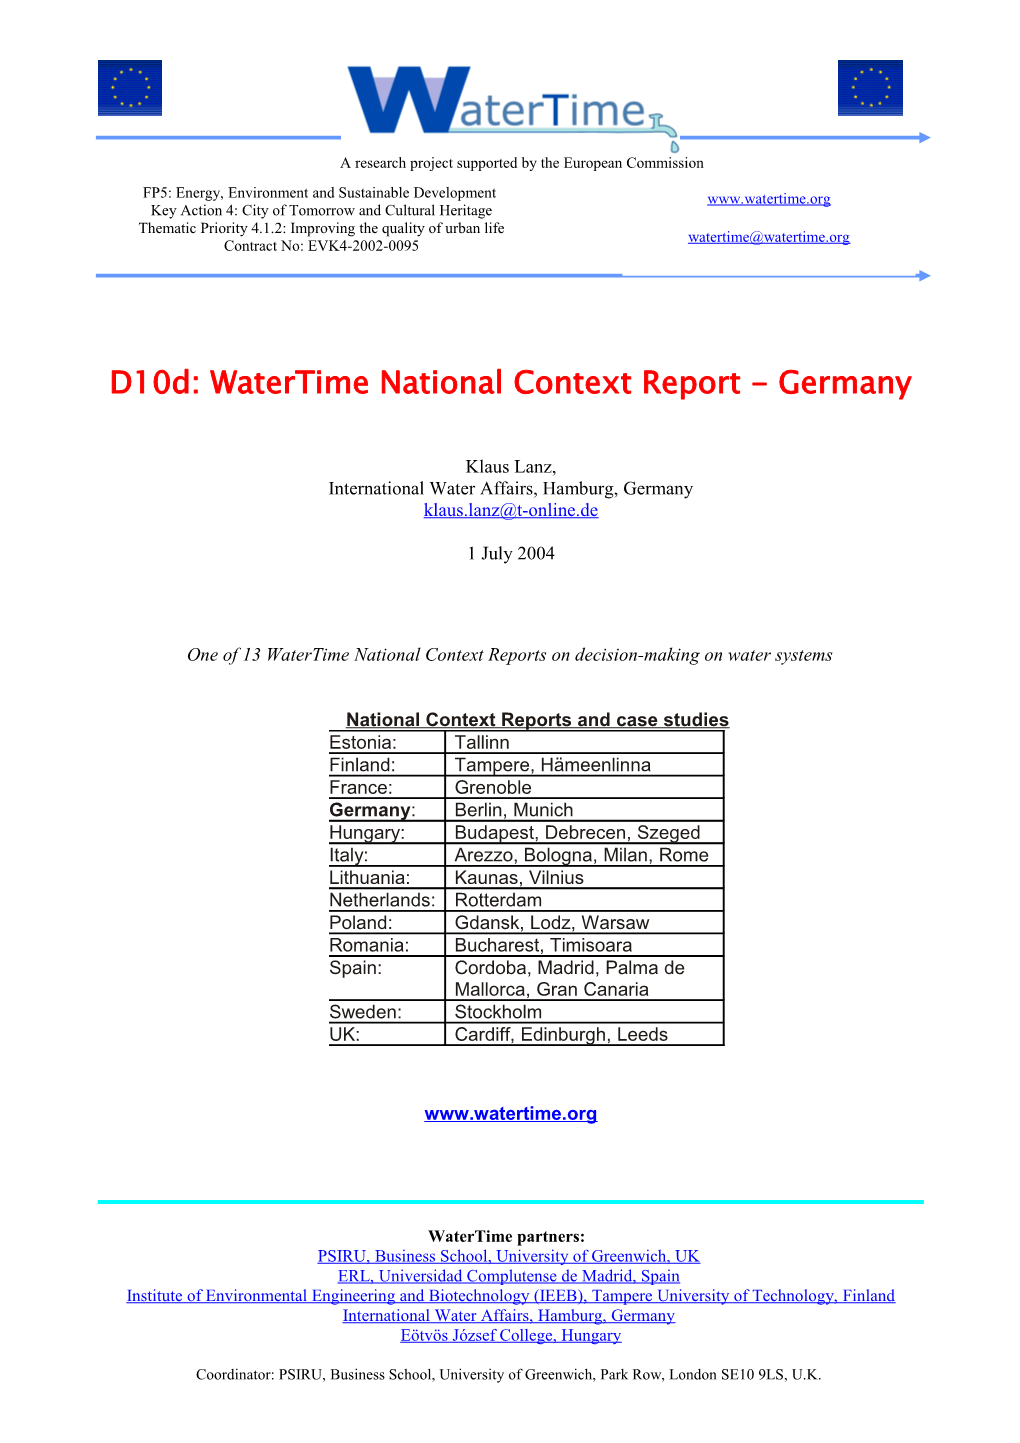 D10d: Watertime National Context Report - Germany